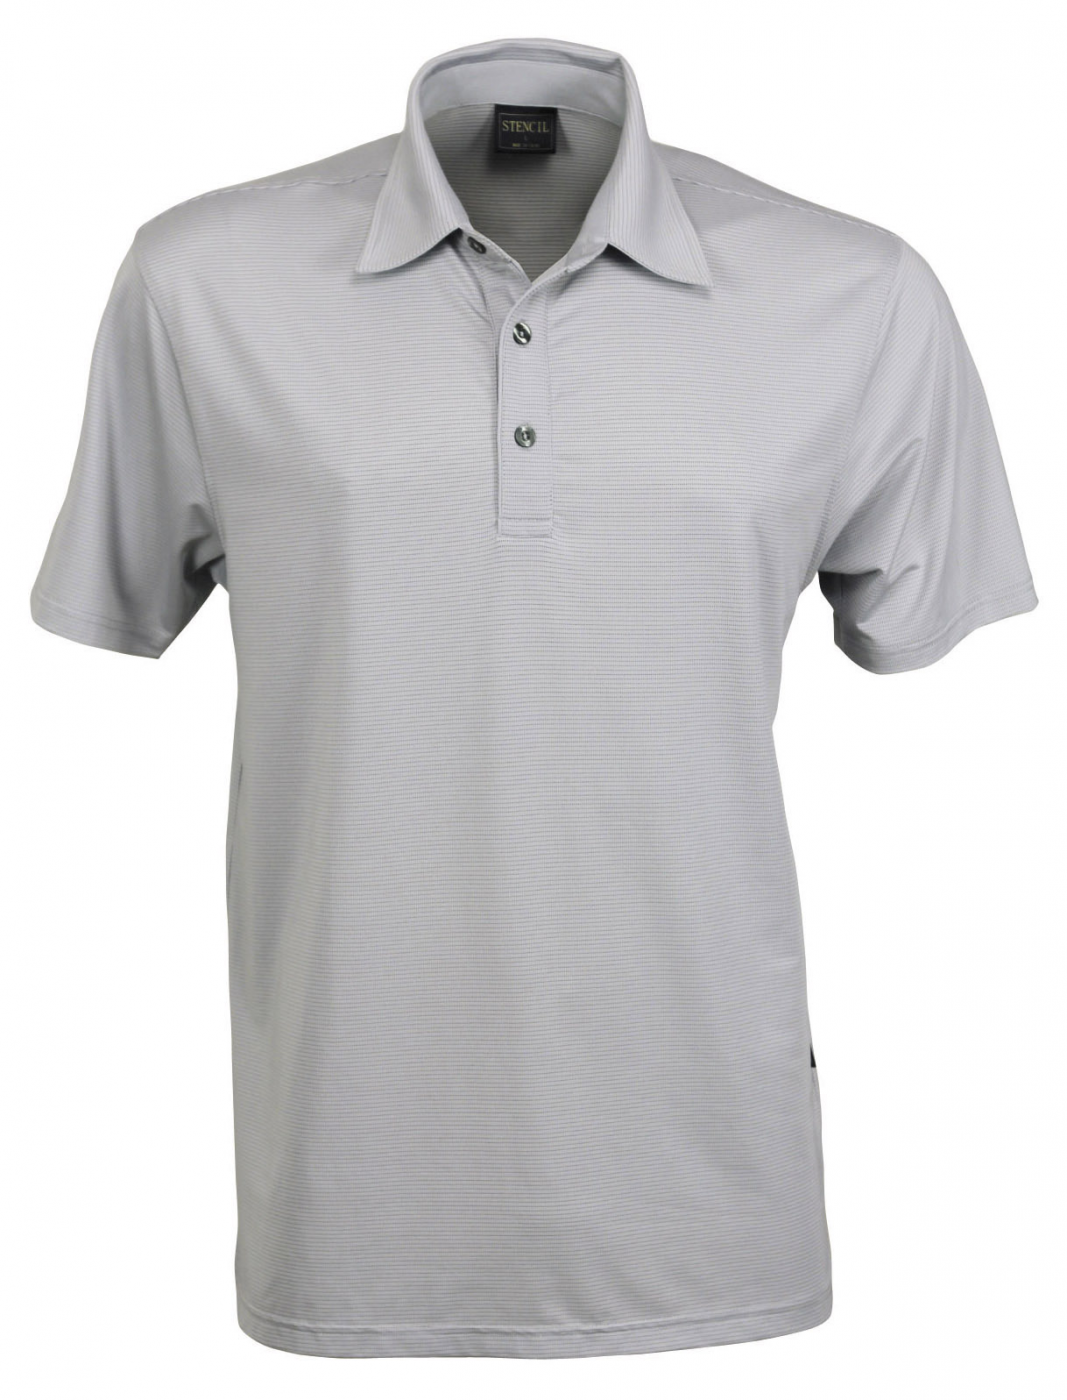 SilverTech S/S Polo | Uniform Super Store | Purchase Polo Shirts with ...